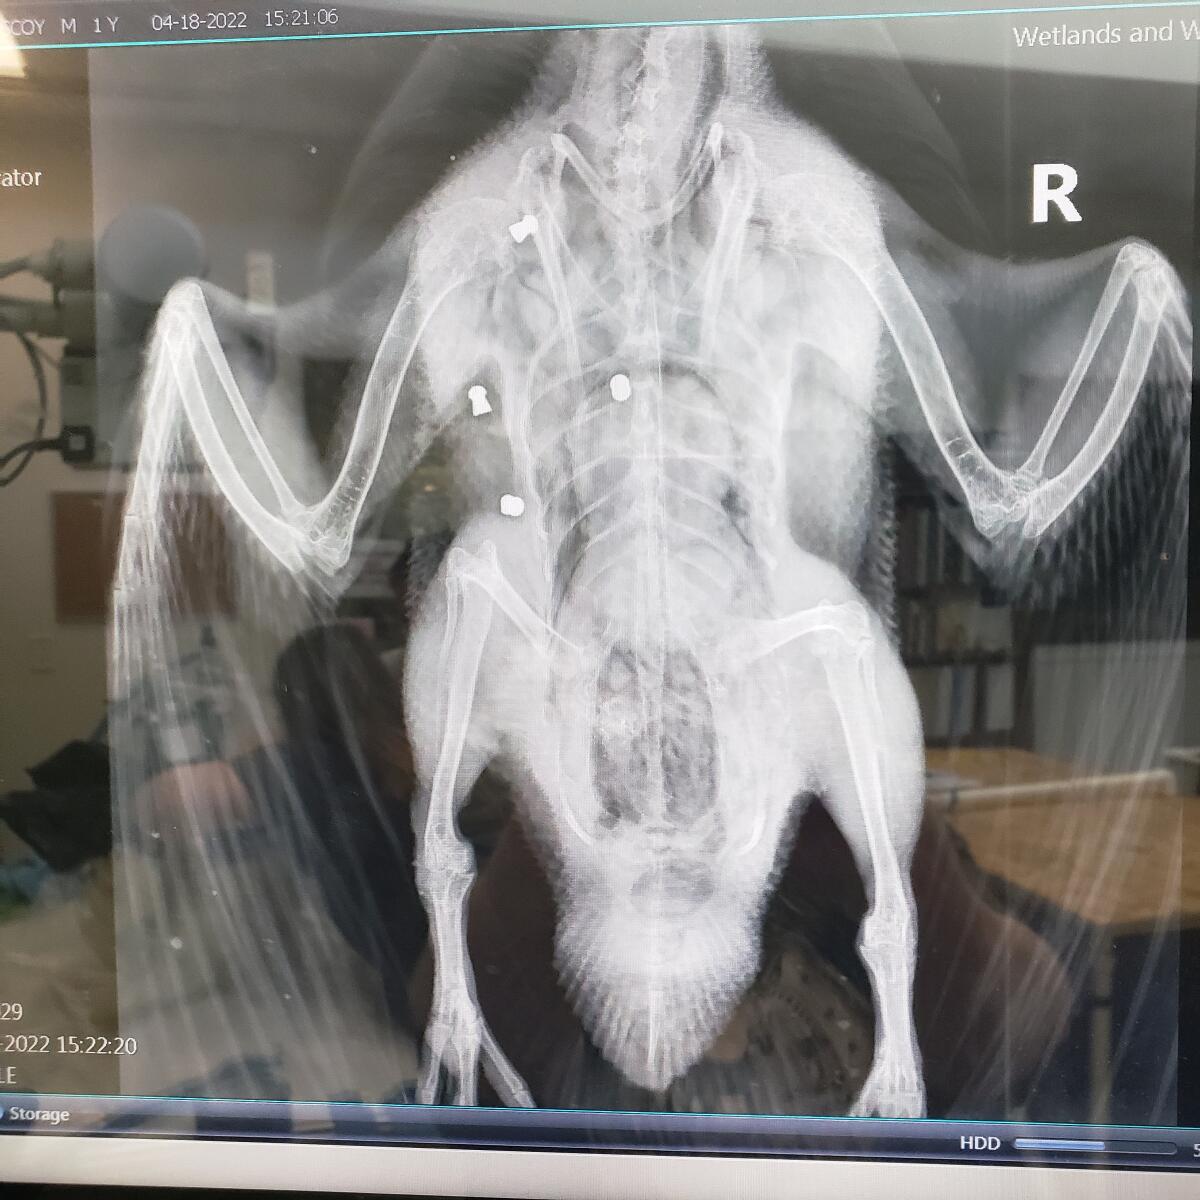 An X-ray of a duck